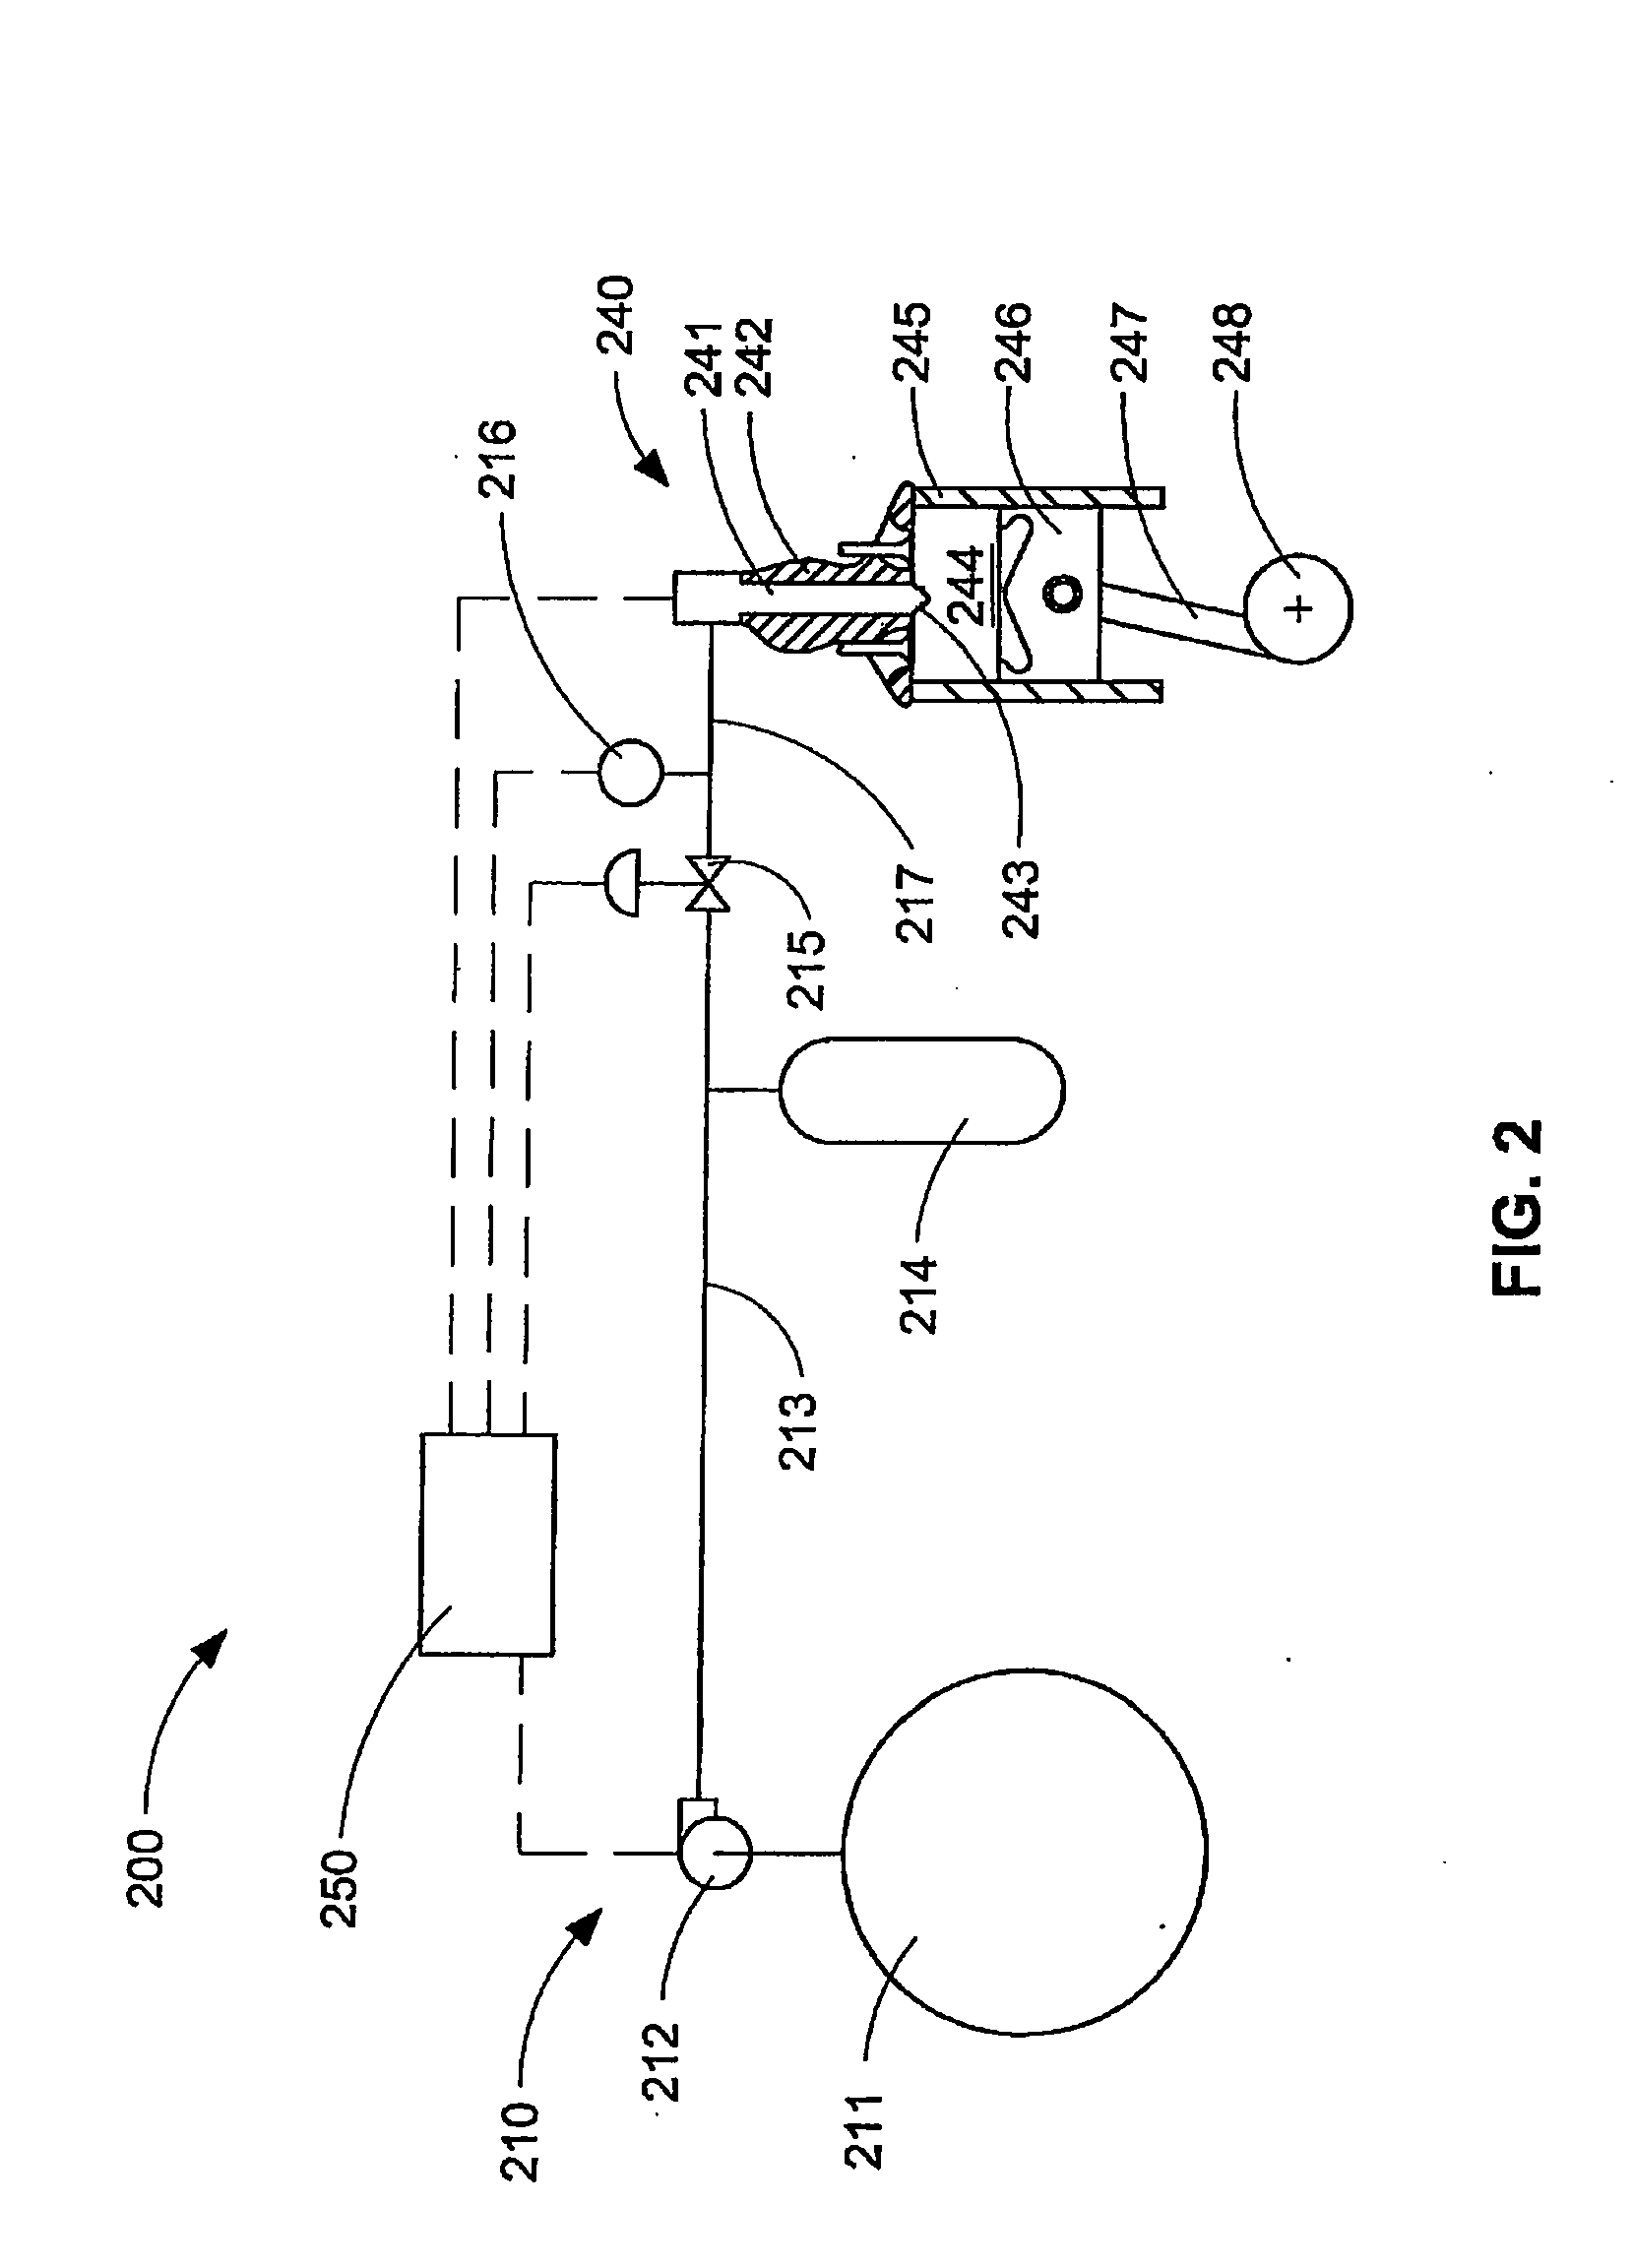 Direct Injection Gaseous-Fuelled Engine And Method Of Controlling Fuel Injection Pressure